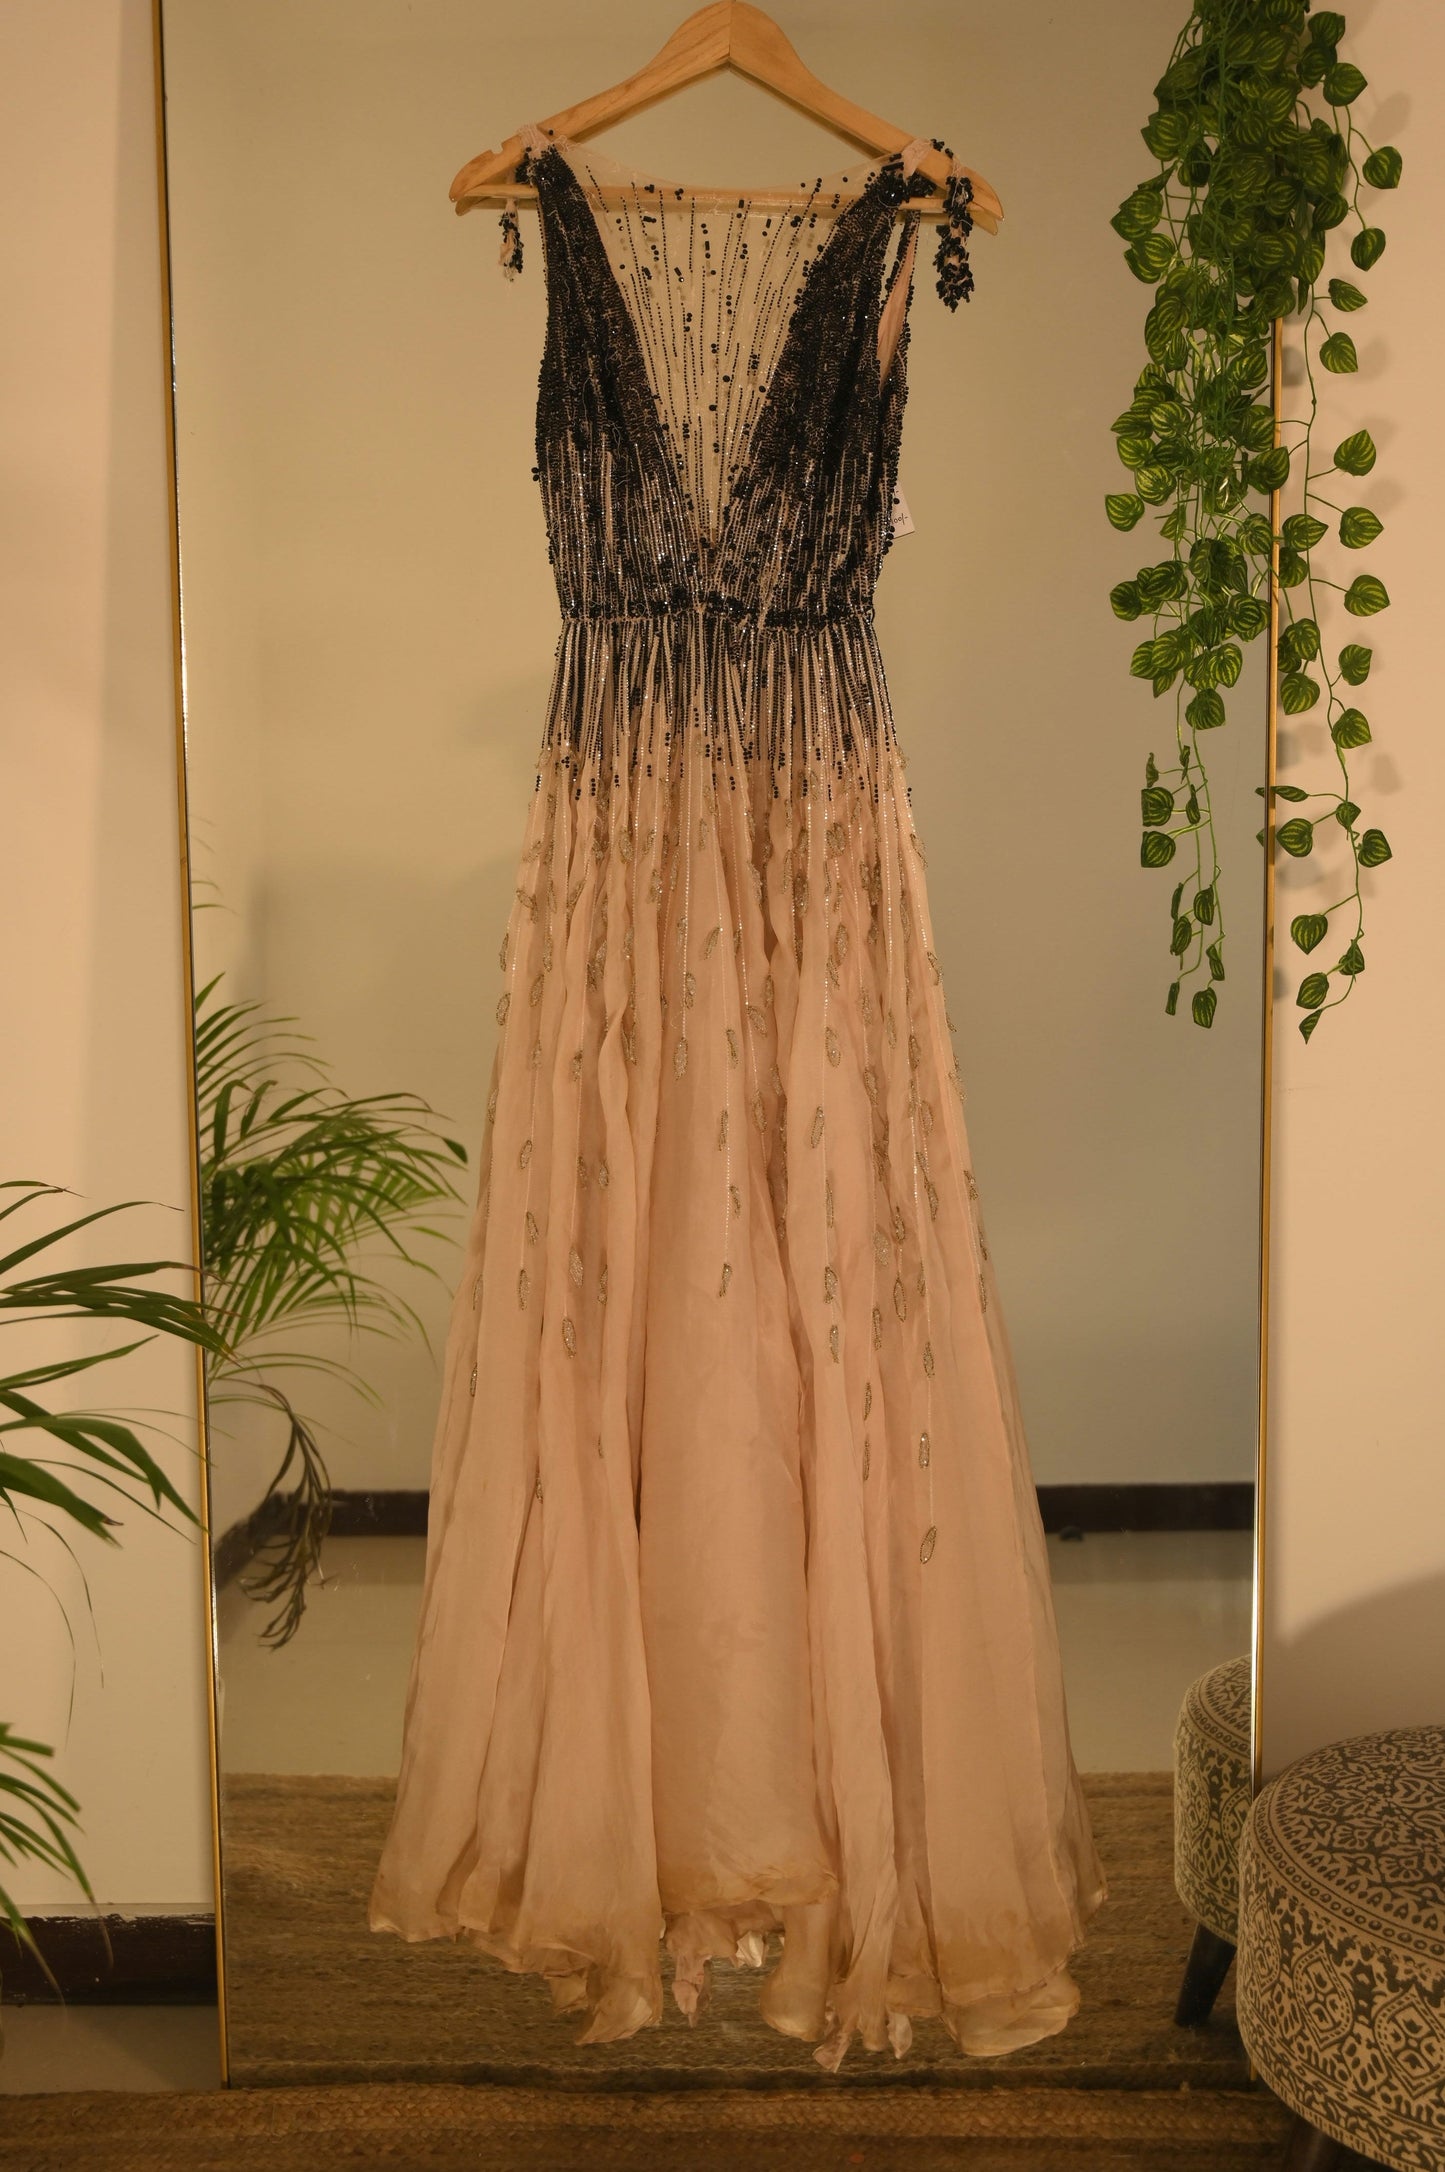 Heavily Embellished Nude Gown with Black Sequins and Beads